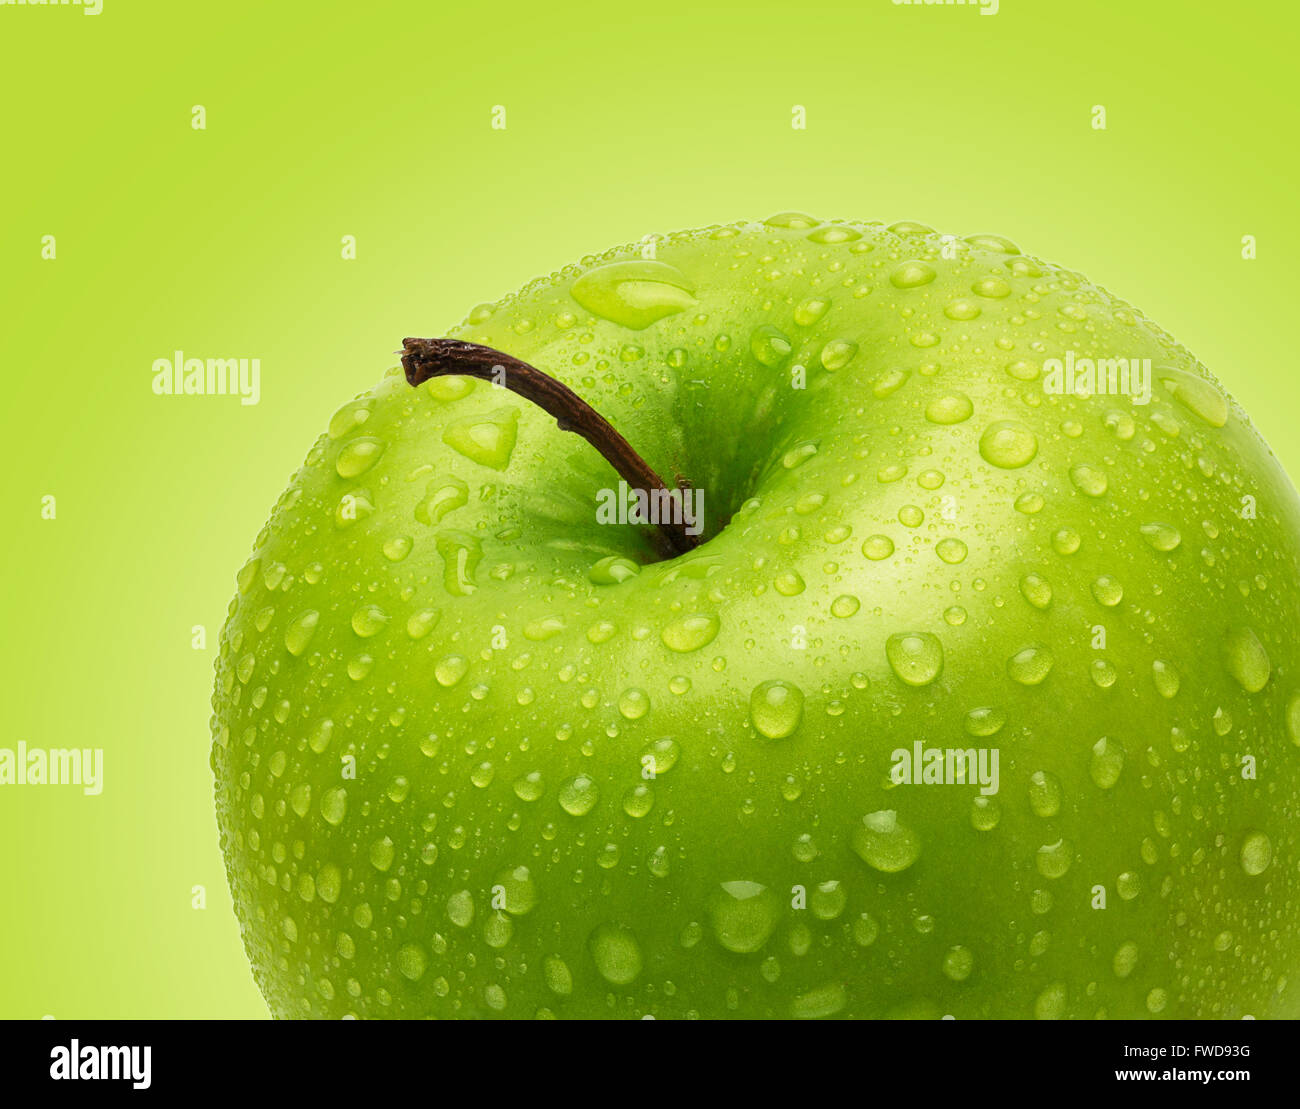 Perfect Fresh Green Apple Isolated on Green Background in Full Depth of Field with Clipping Path. Stock Photo